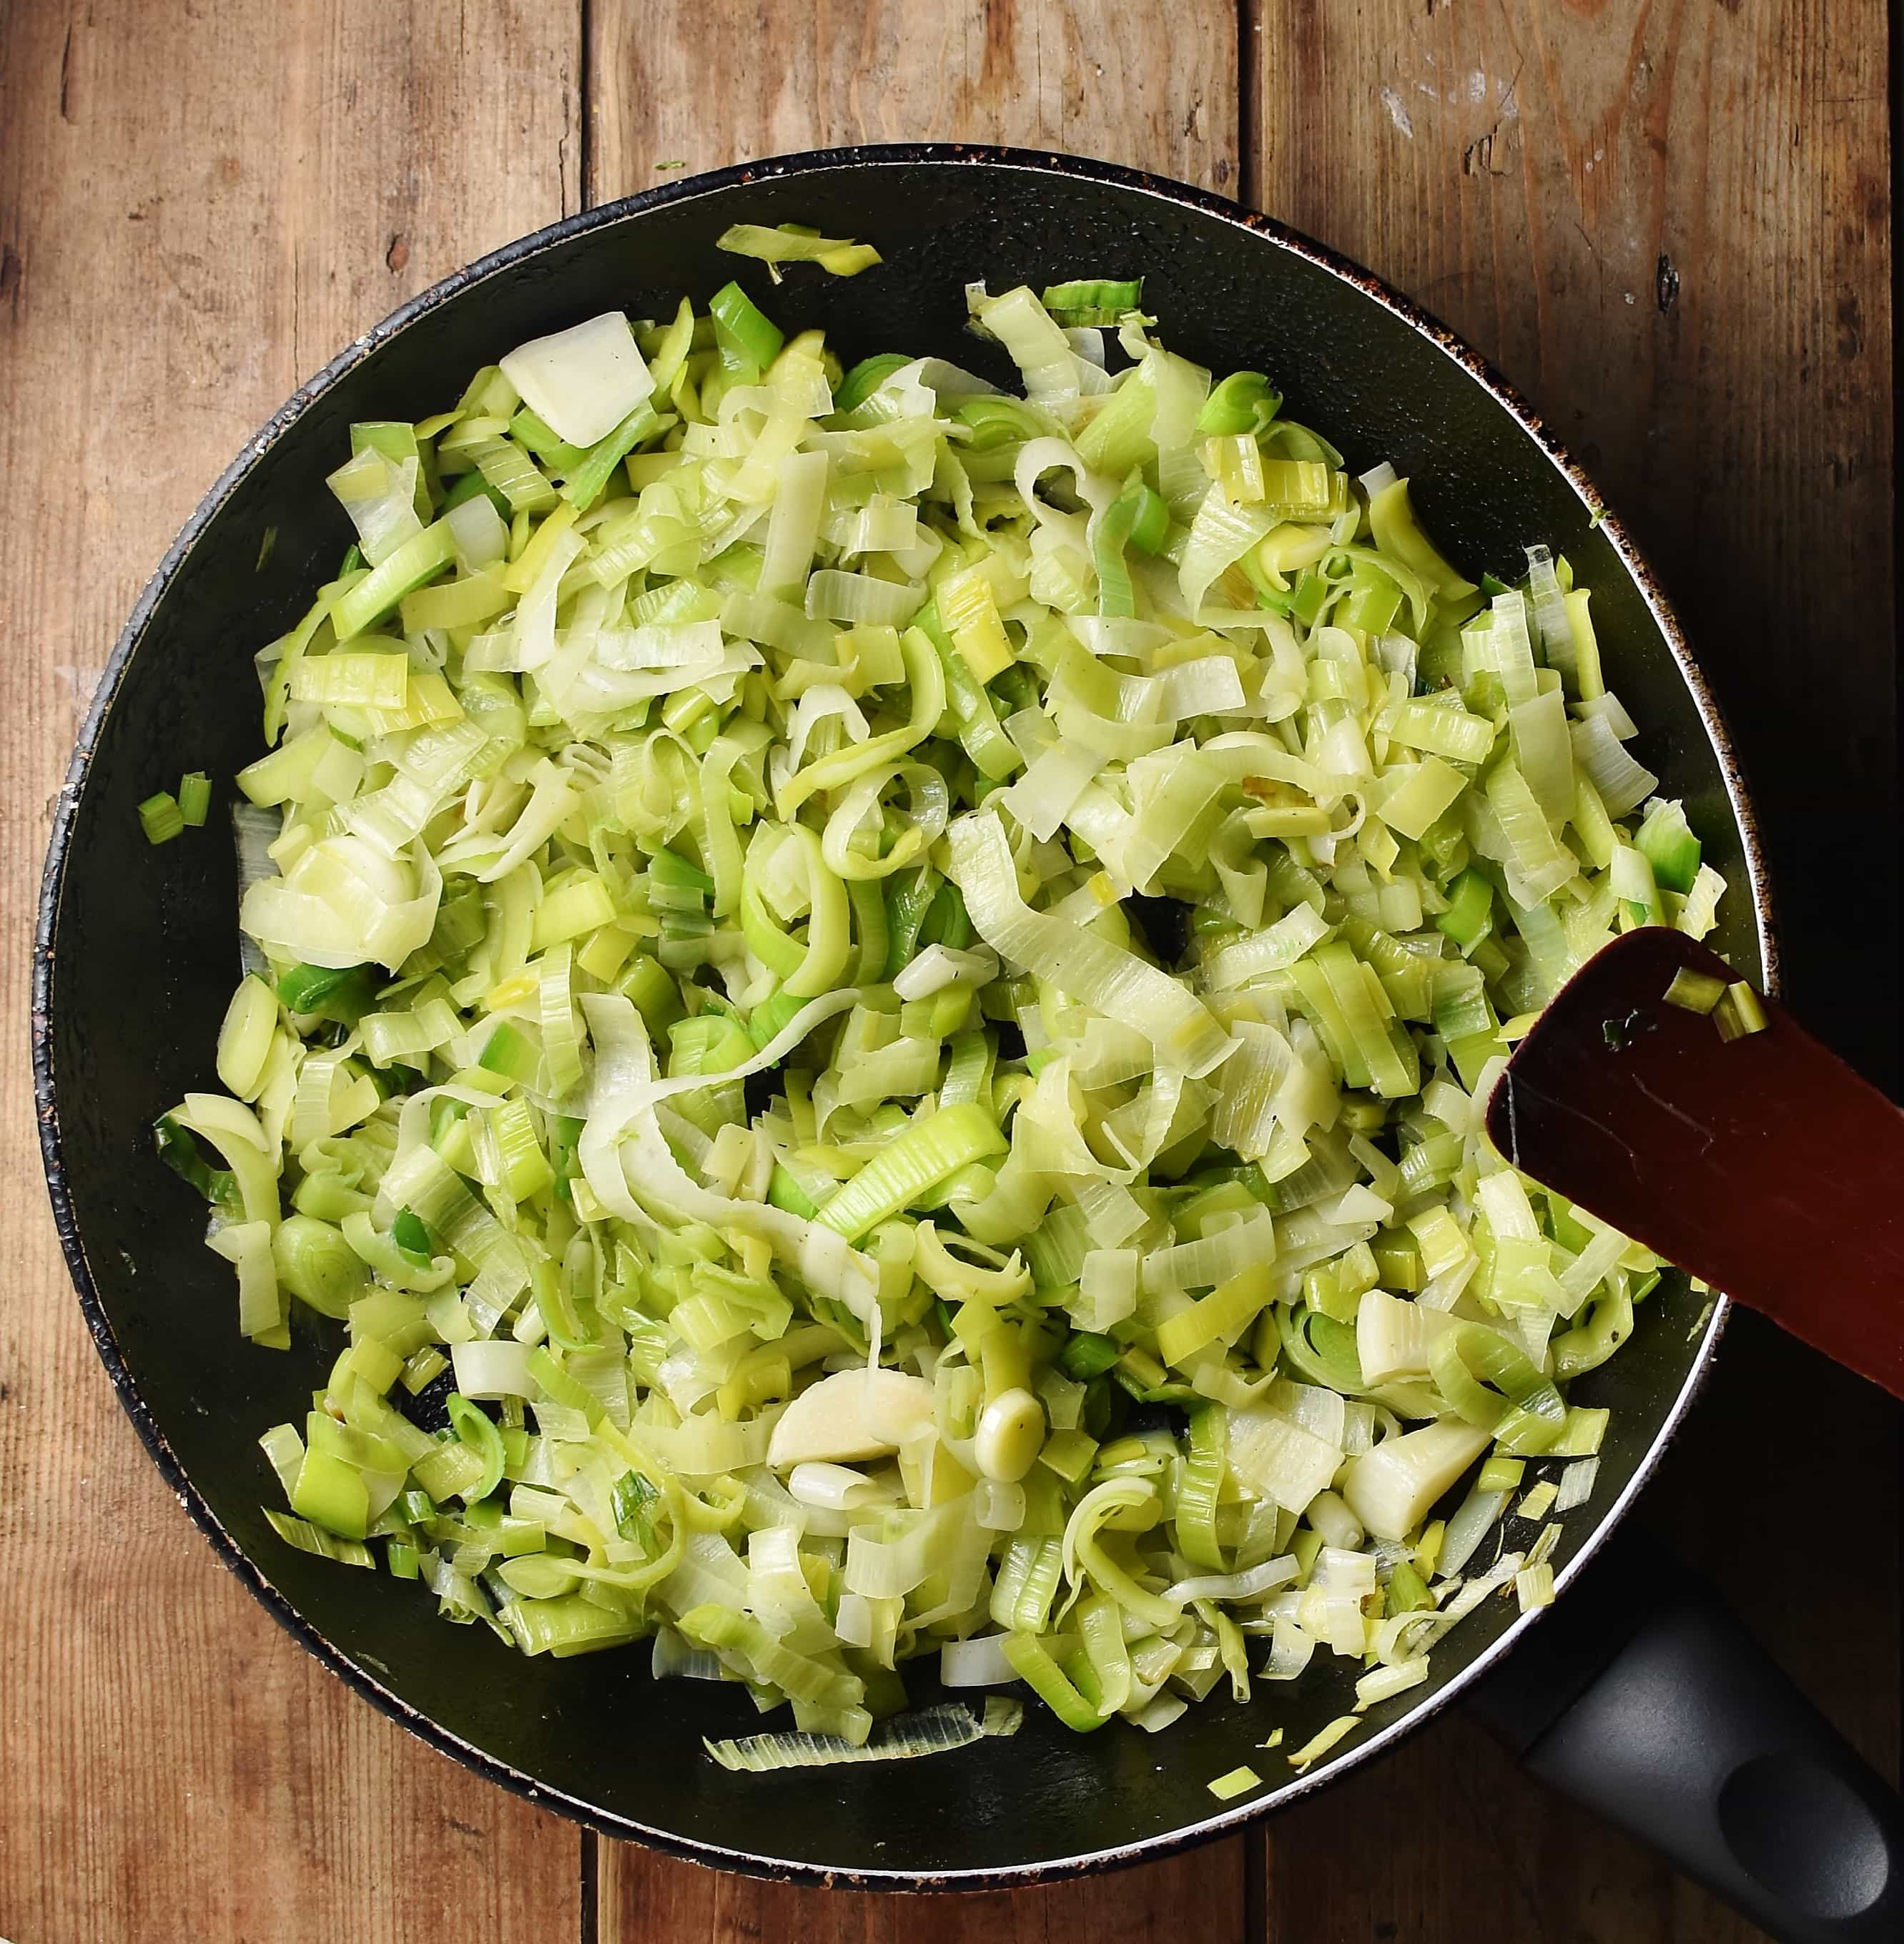 Chopped leeks in large skillet with black spatula to the right.